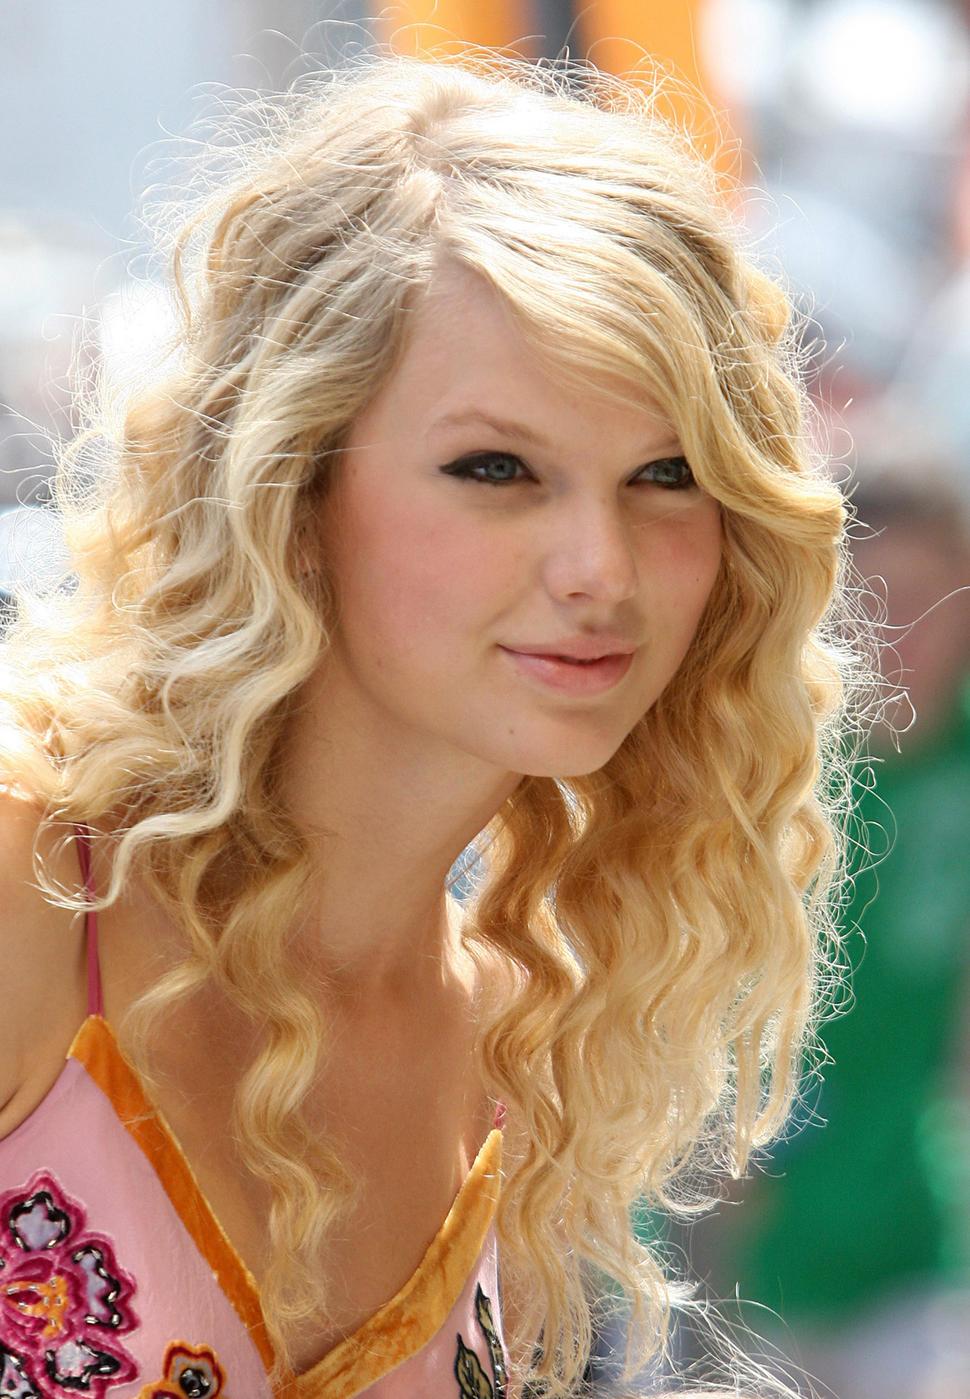 Taylor-Swift-Hot-Pictures-1.jpg